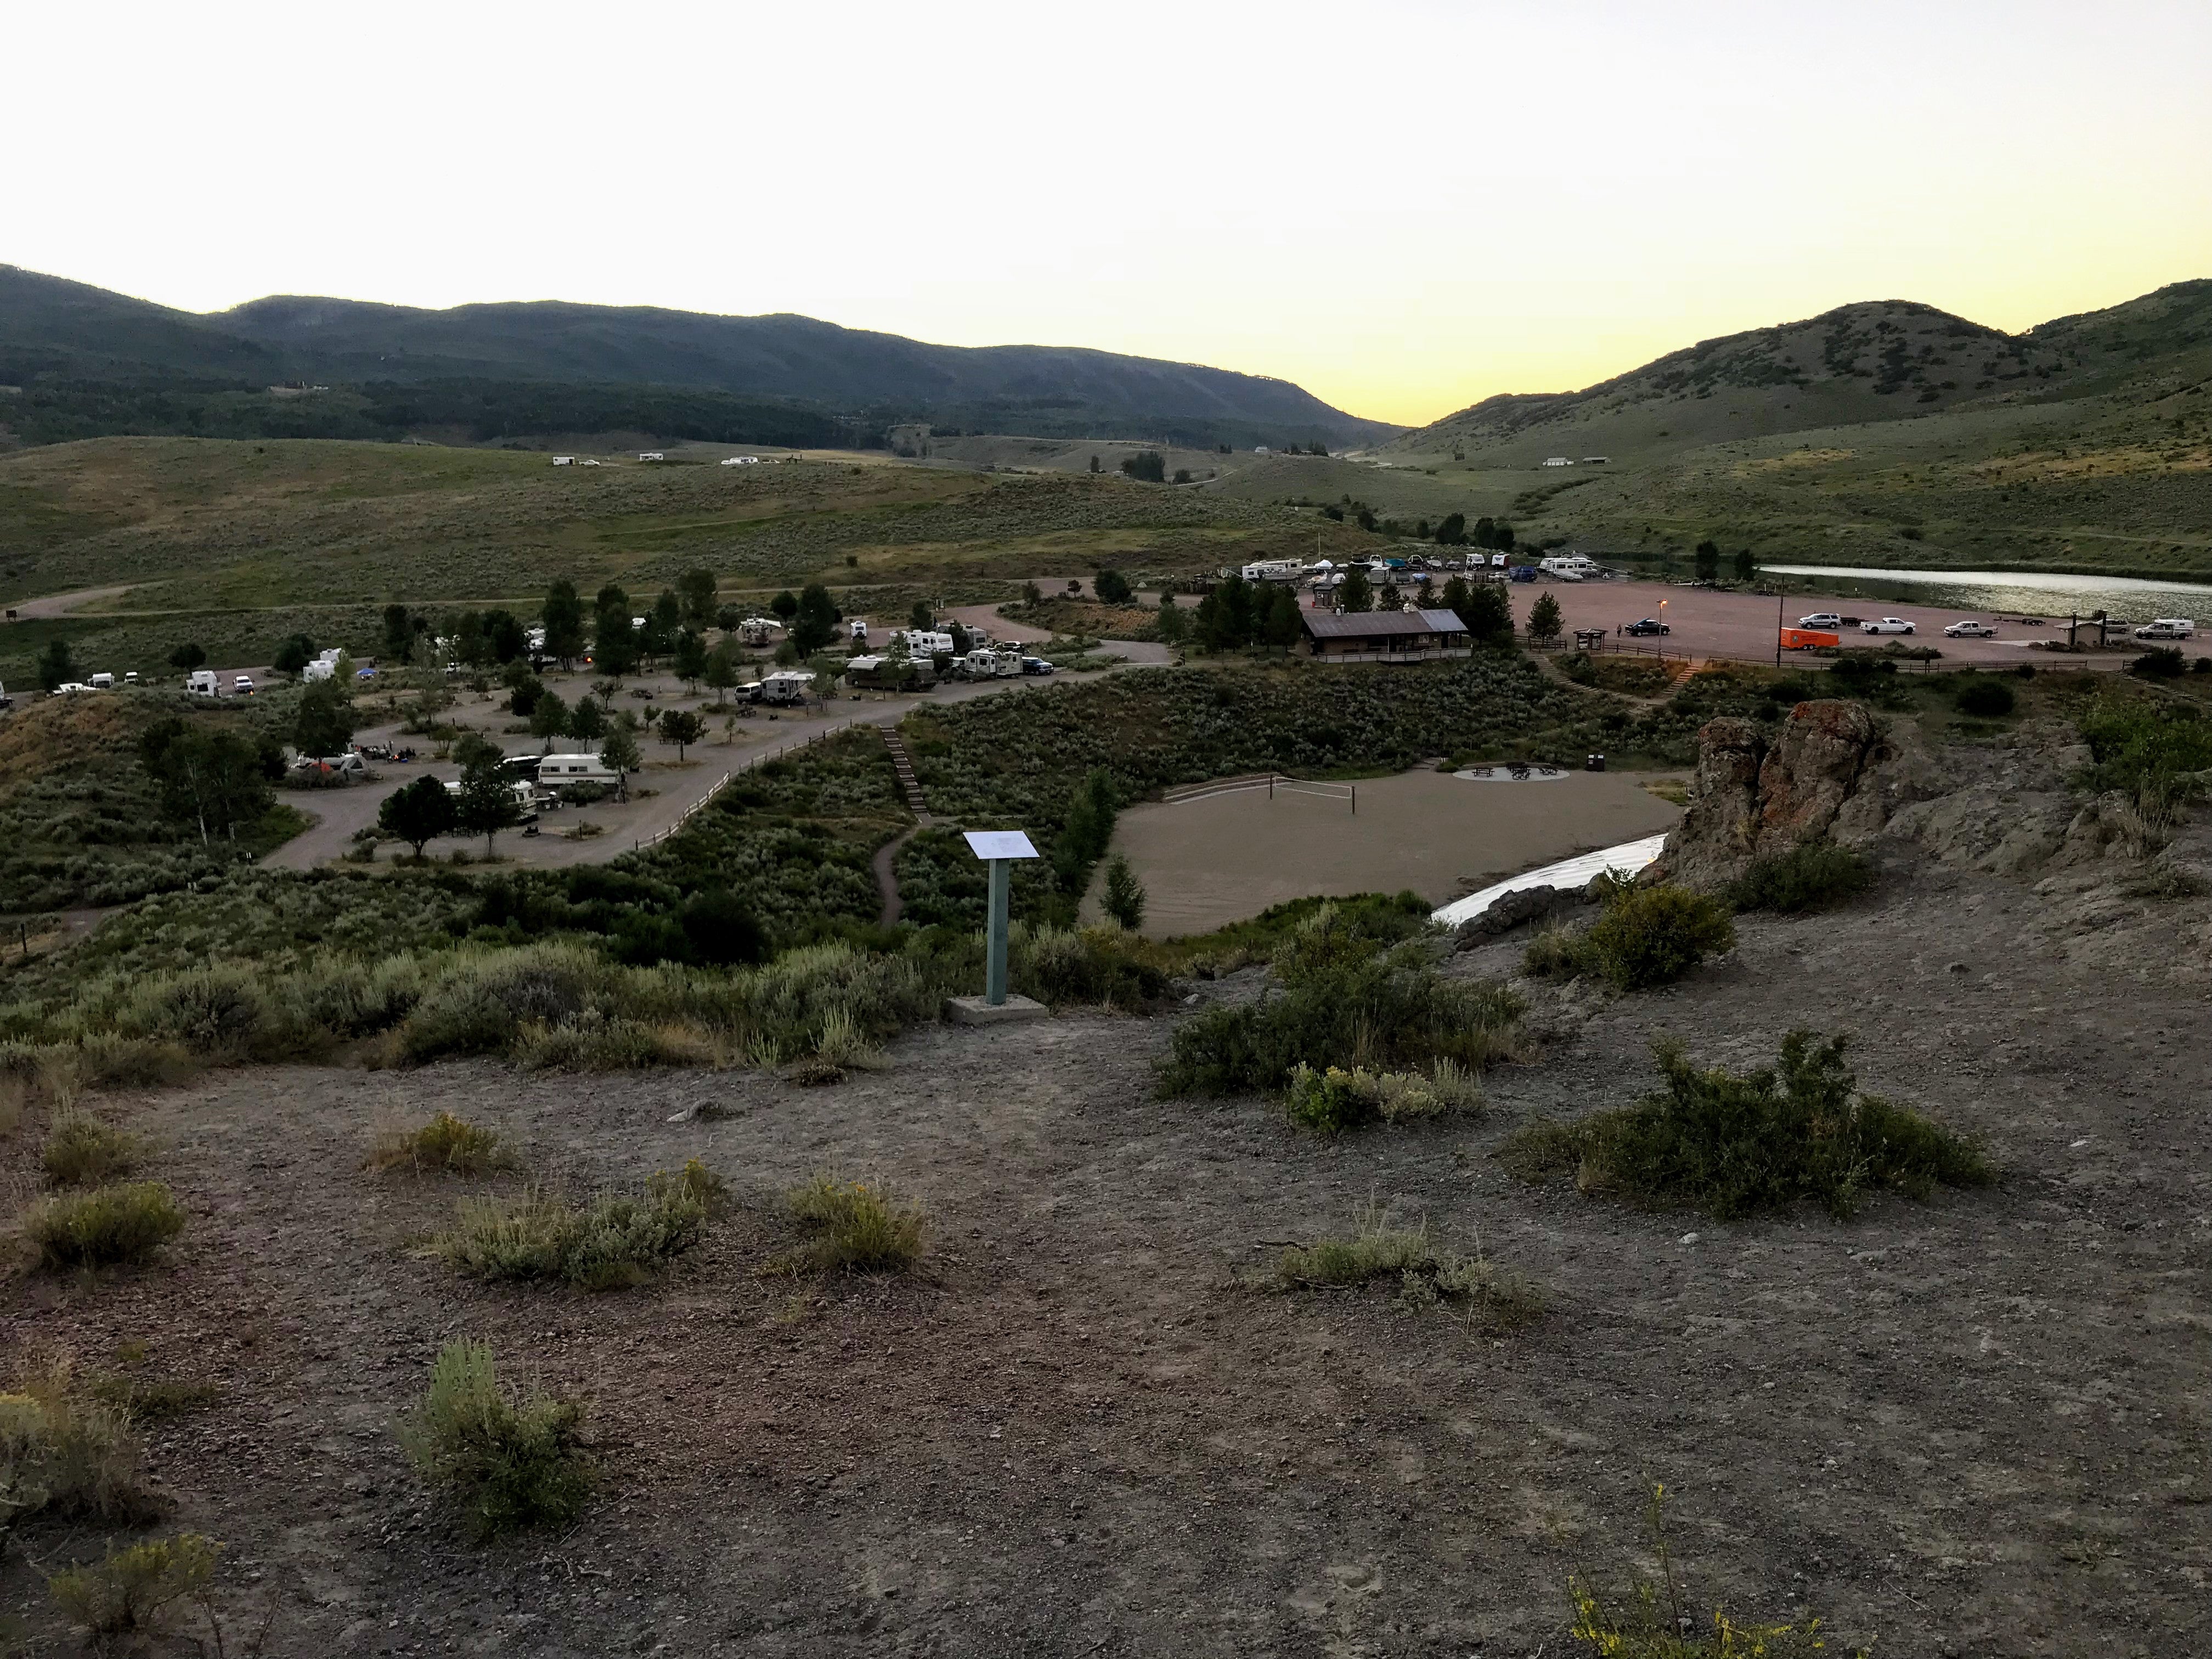 Overview of the campground